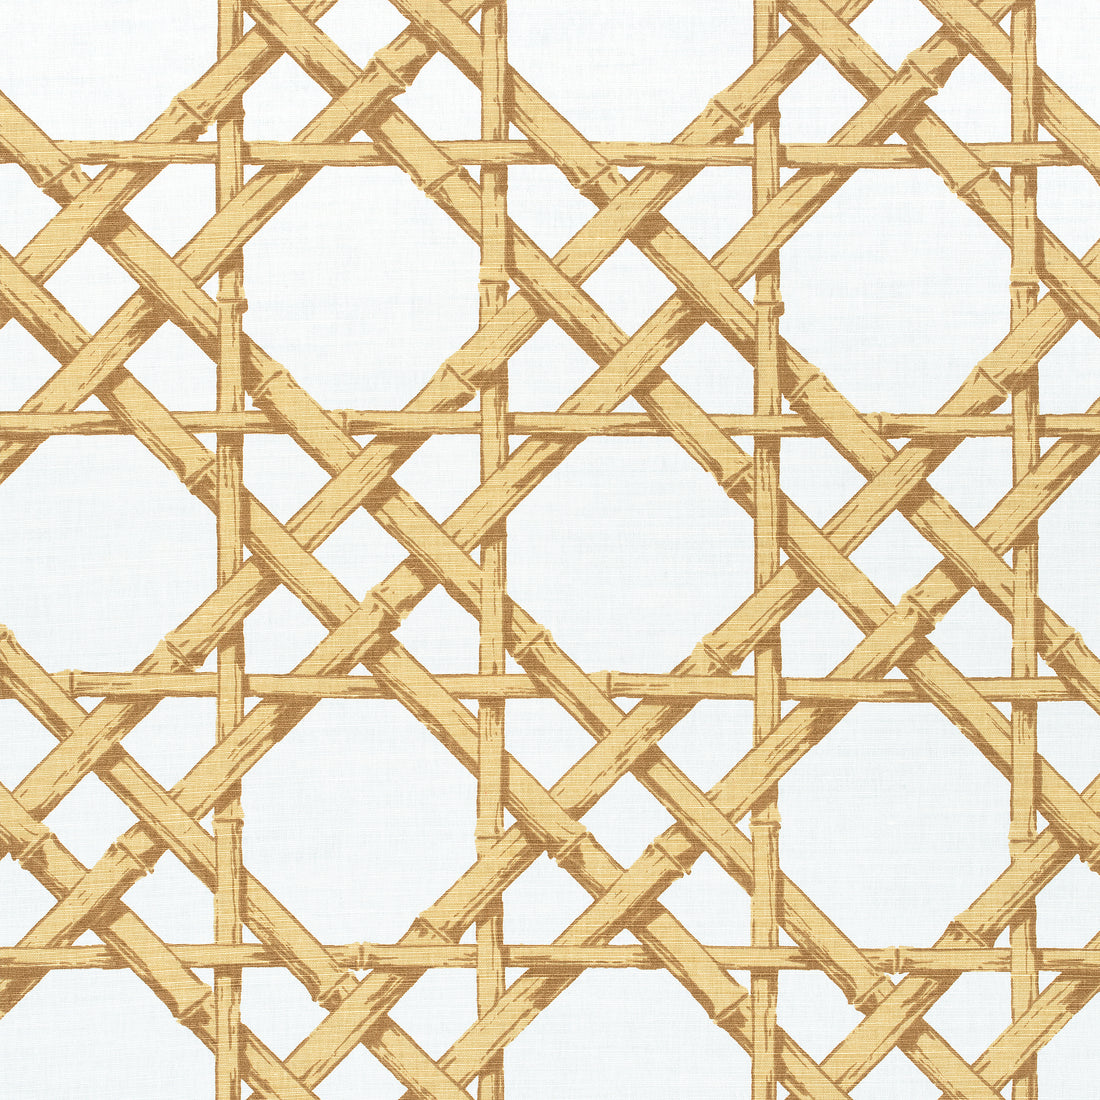 Cyrus Cane fabric in gold color - pattern number F913144 - by Thibaut in the Summer House collection